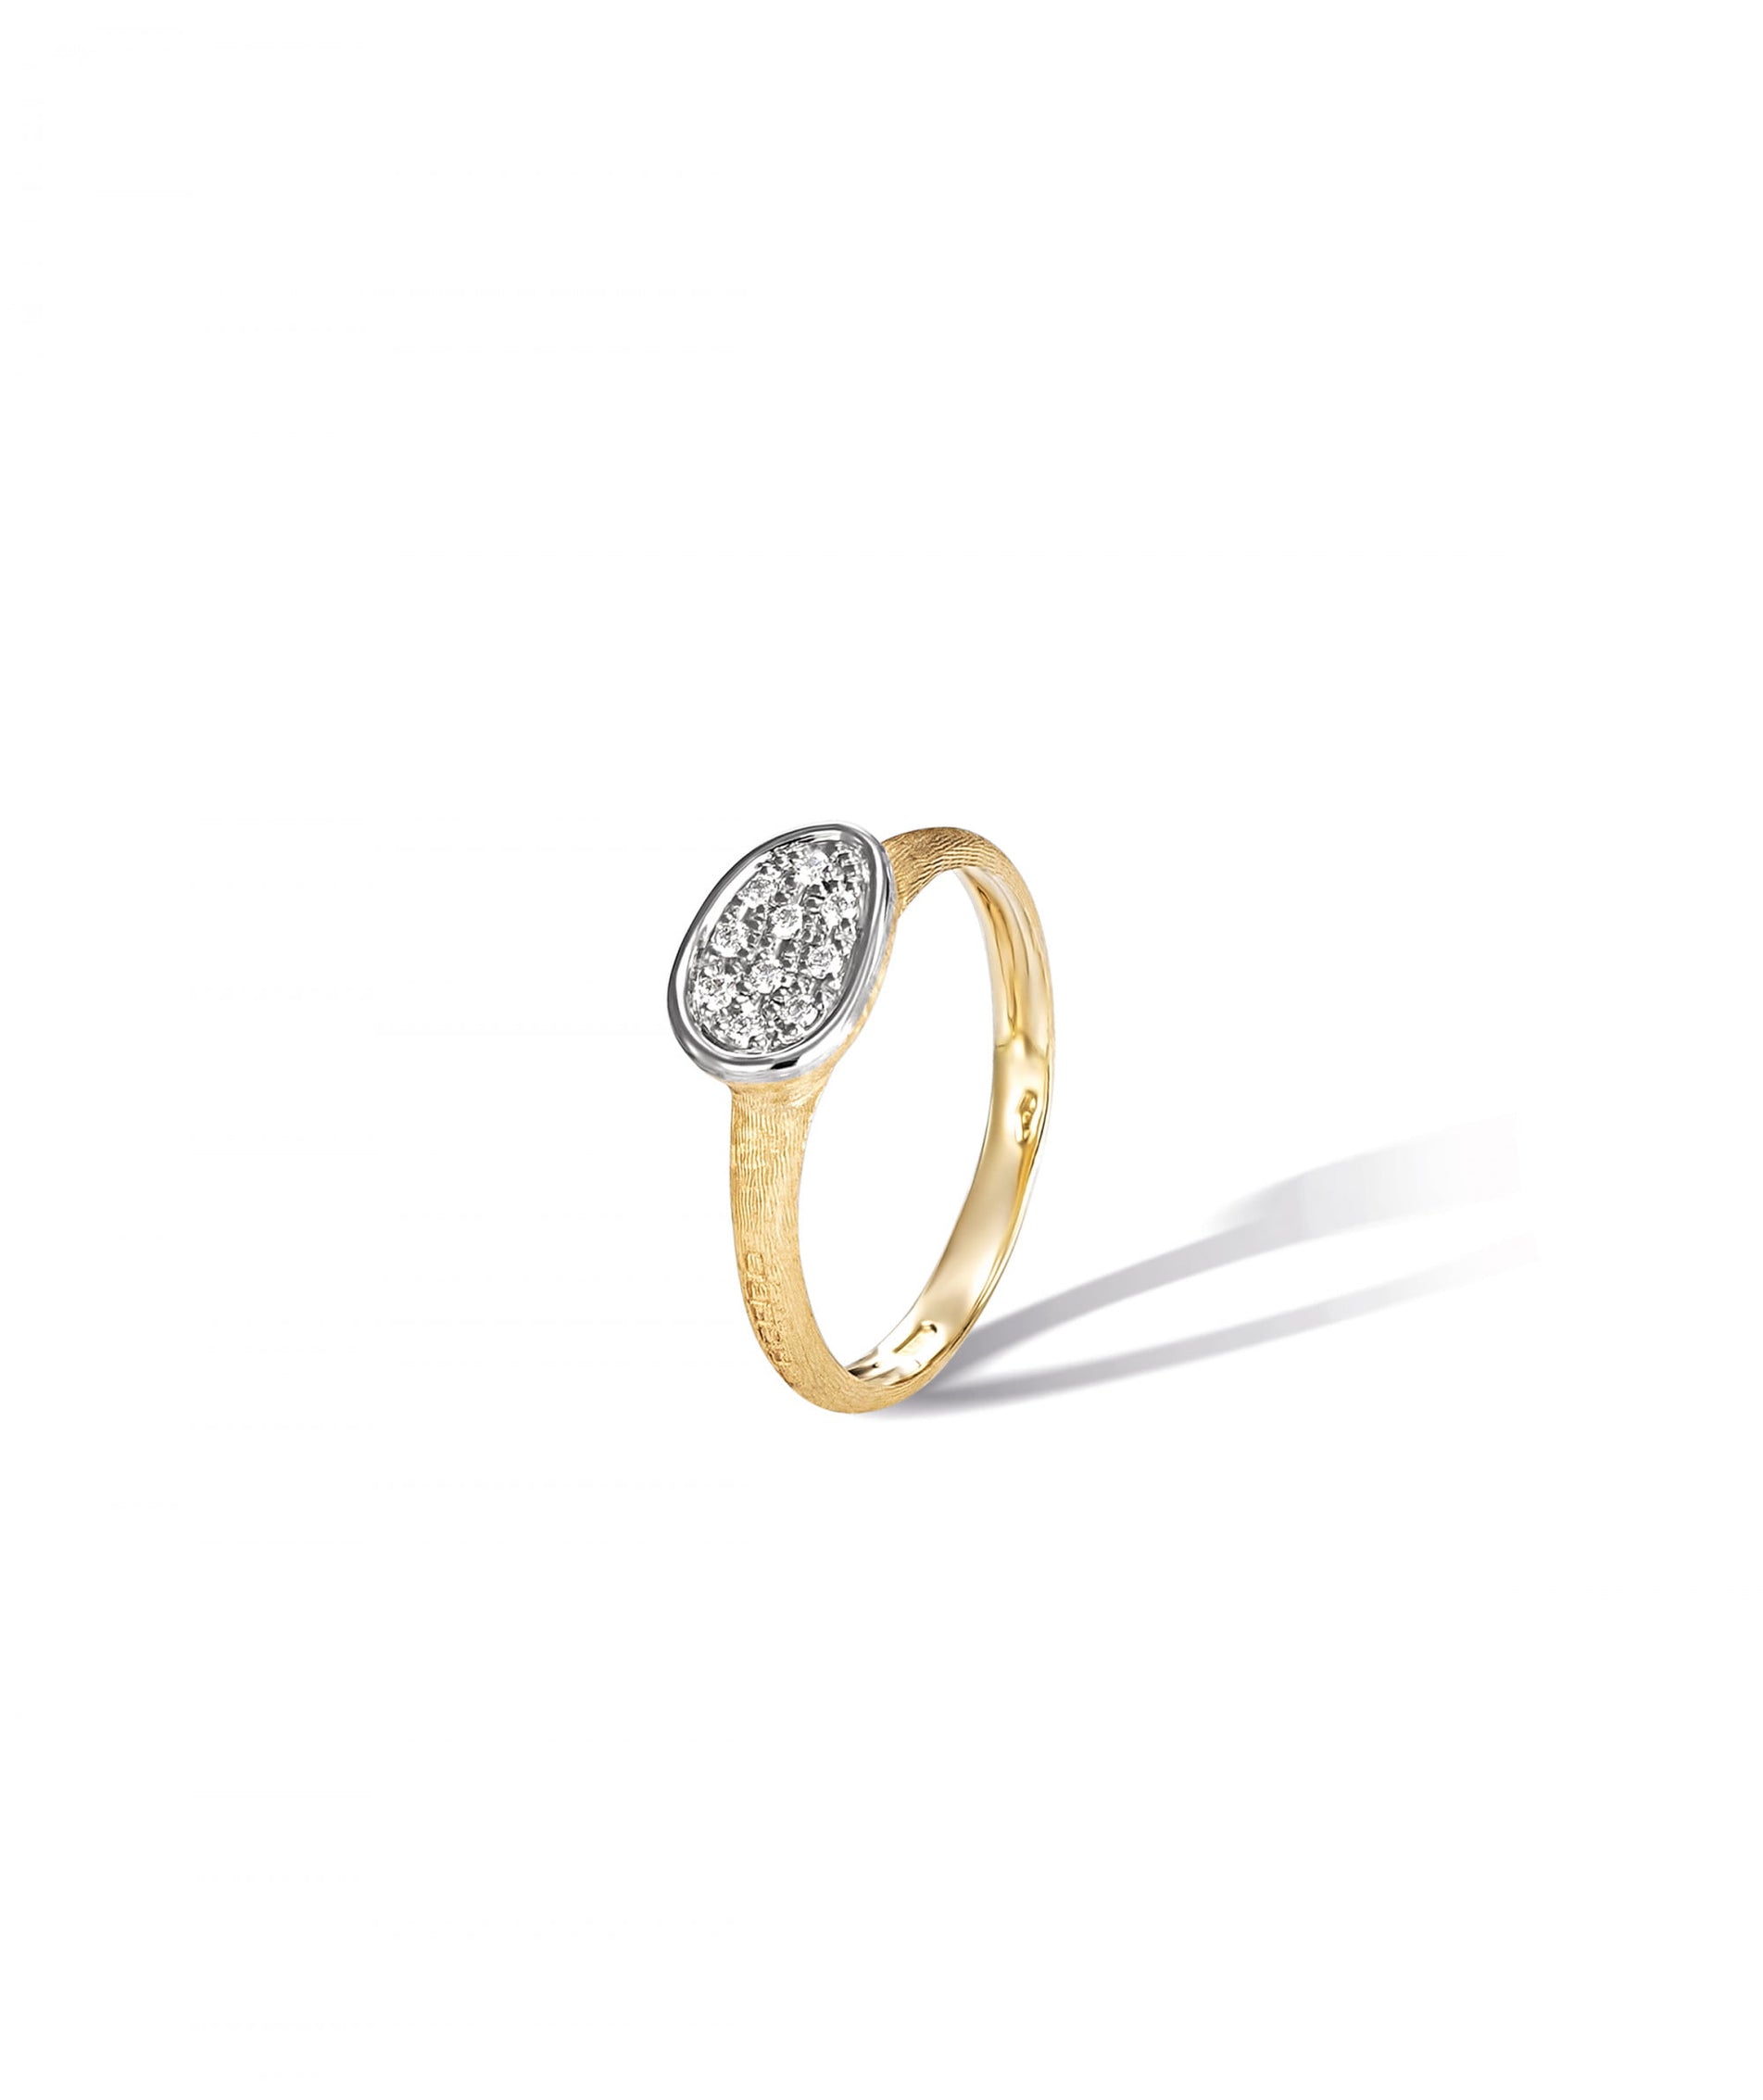 Marco Bicego Lunaria Mini Ring in 18k Yellow and White Gold with Diamonds - Orsini Jewellers NZ